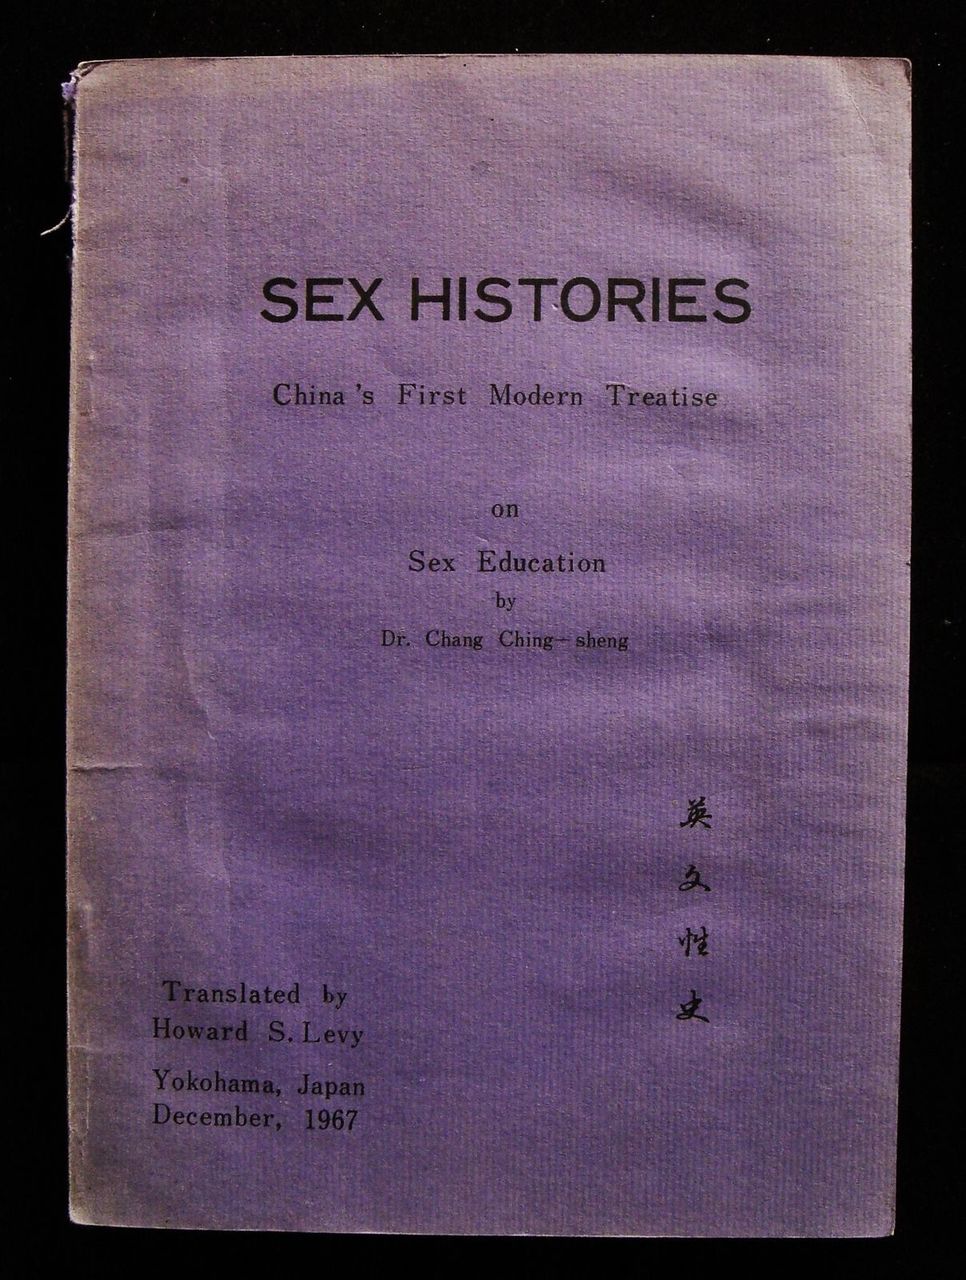 SEX HISTORIES-CHINA's 1st MODERN TREATISE, by Chang Ching-sheng - 1967